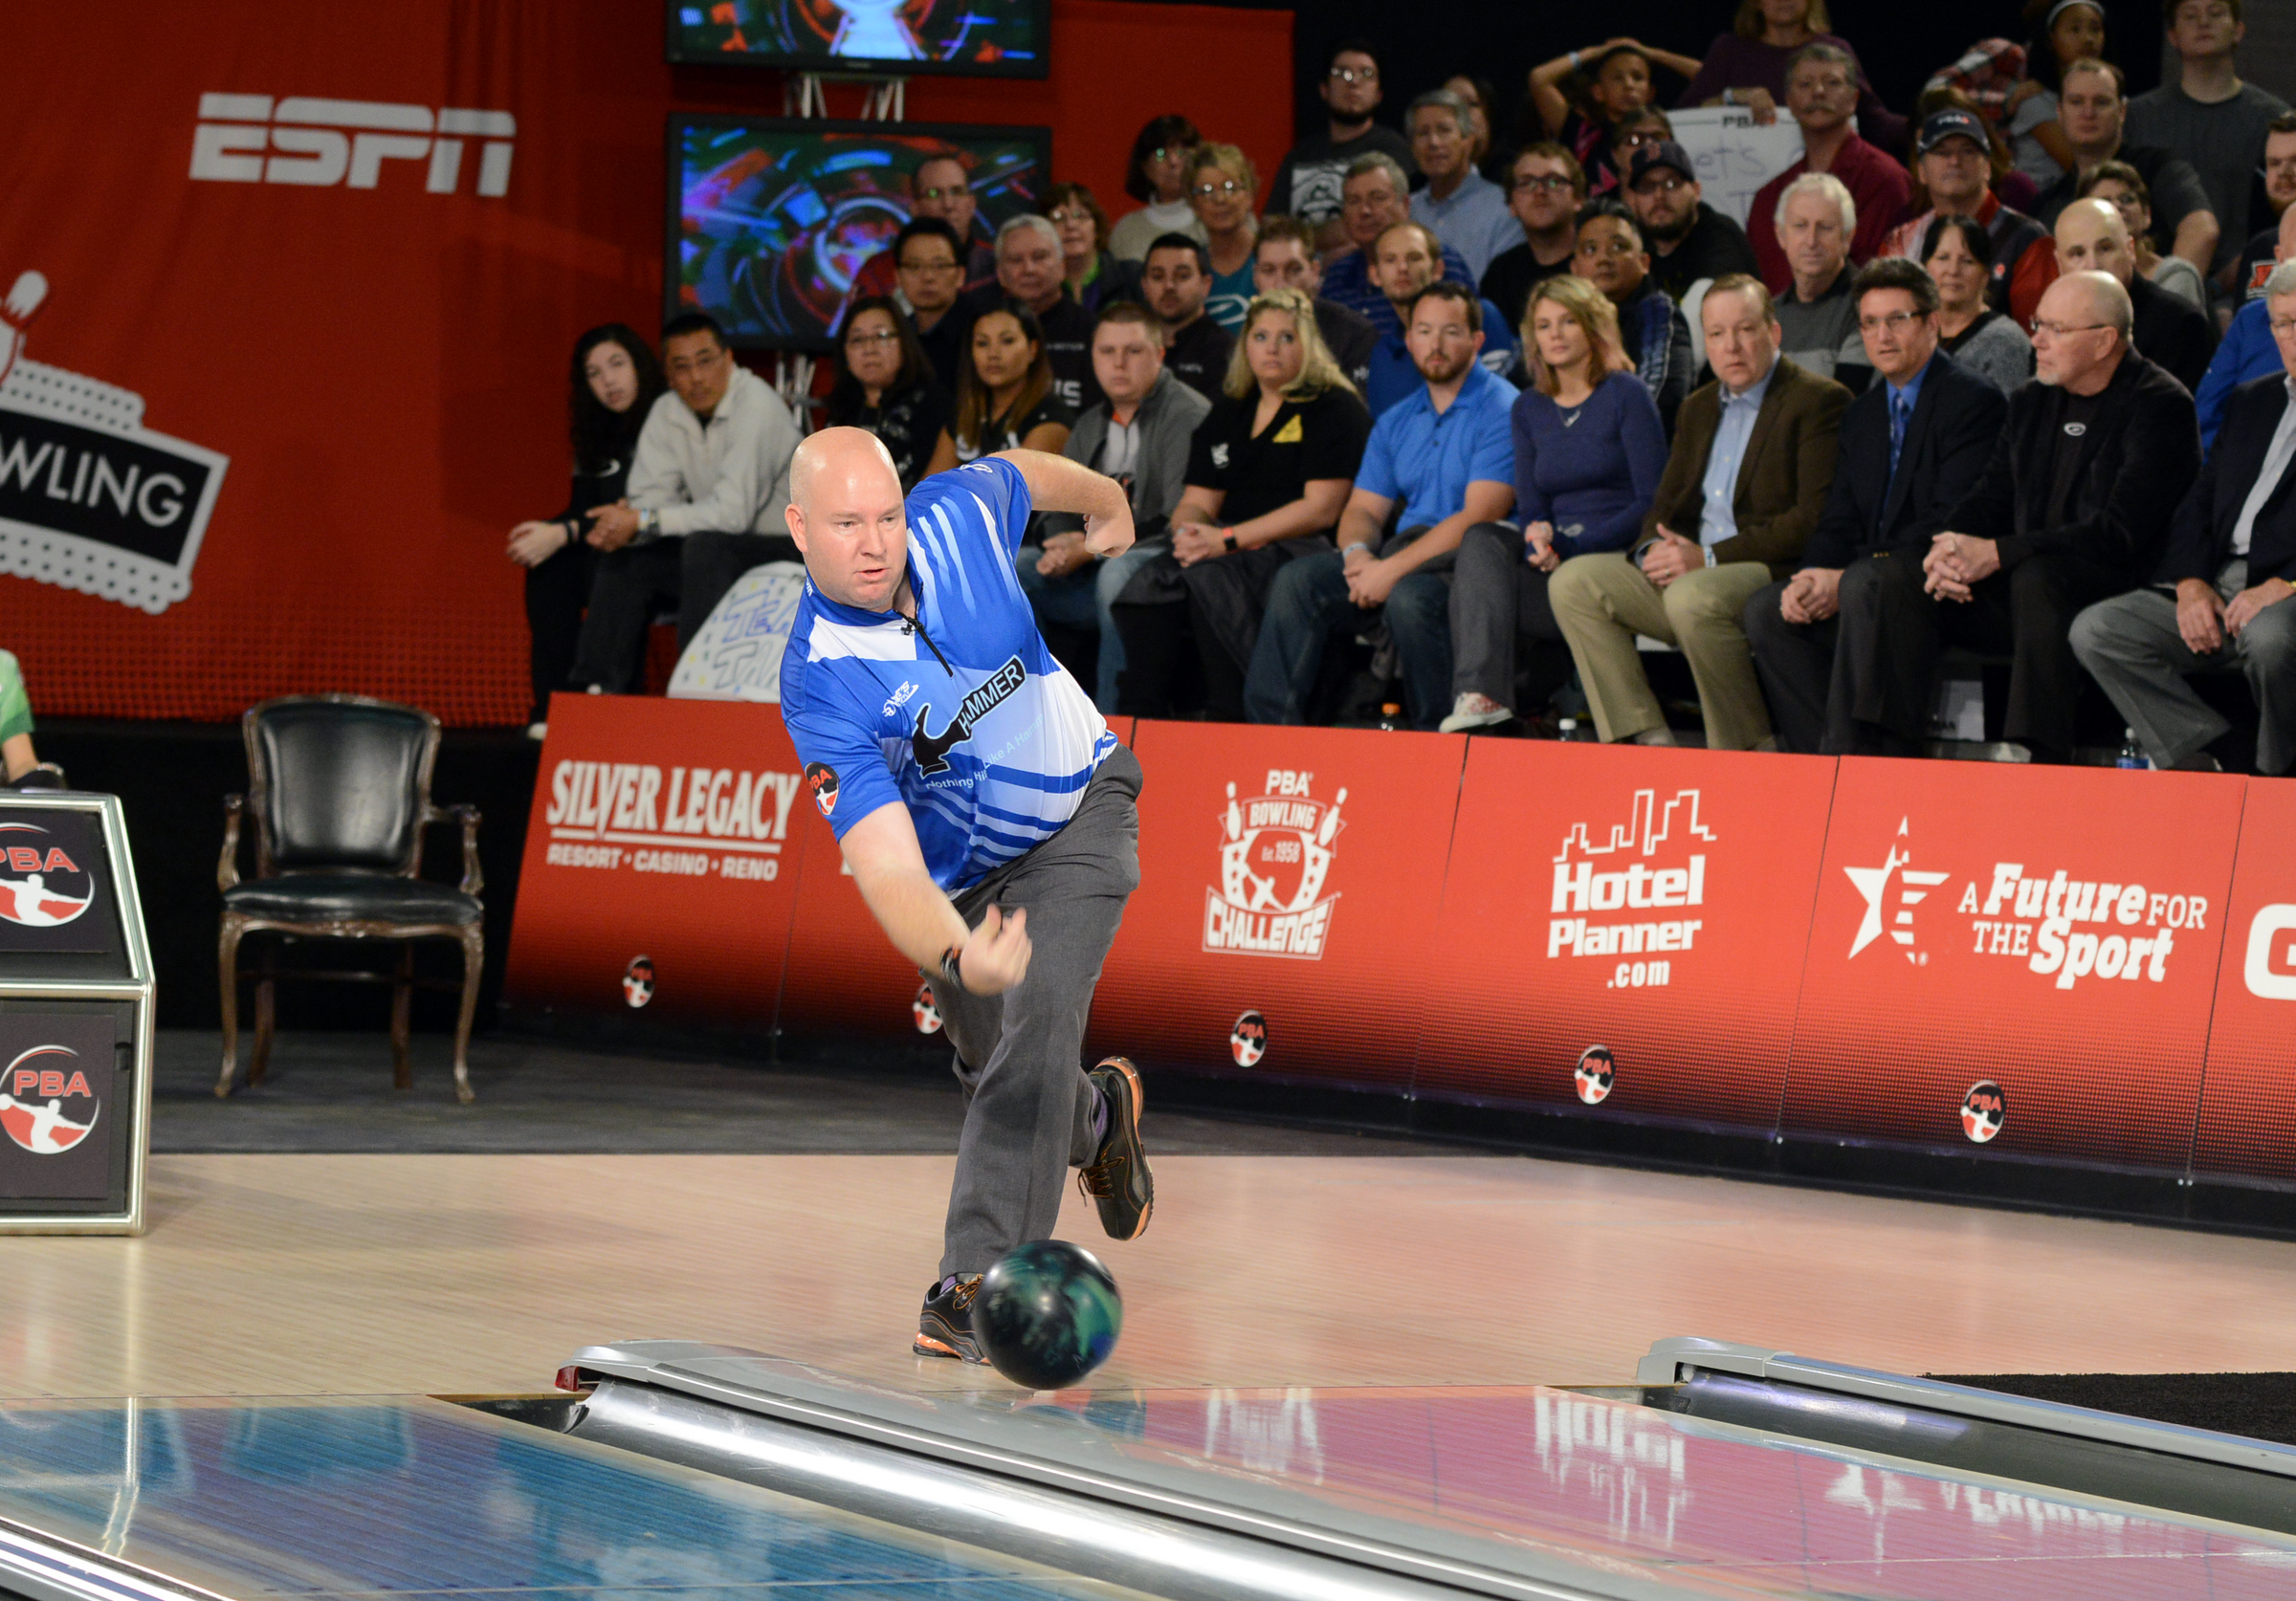 Mike Wolfe bowling.